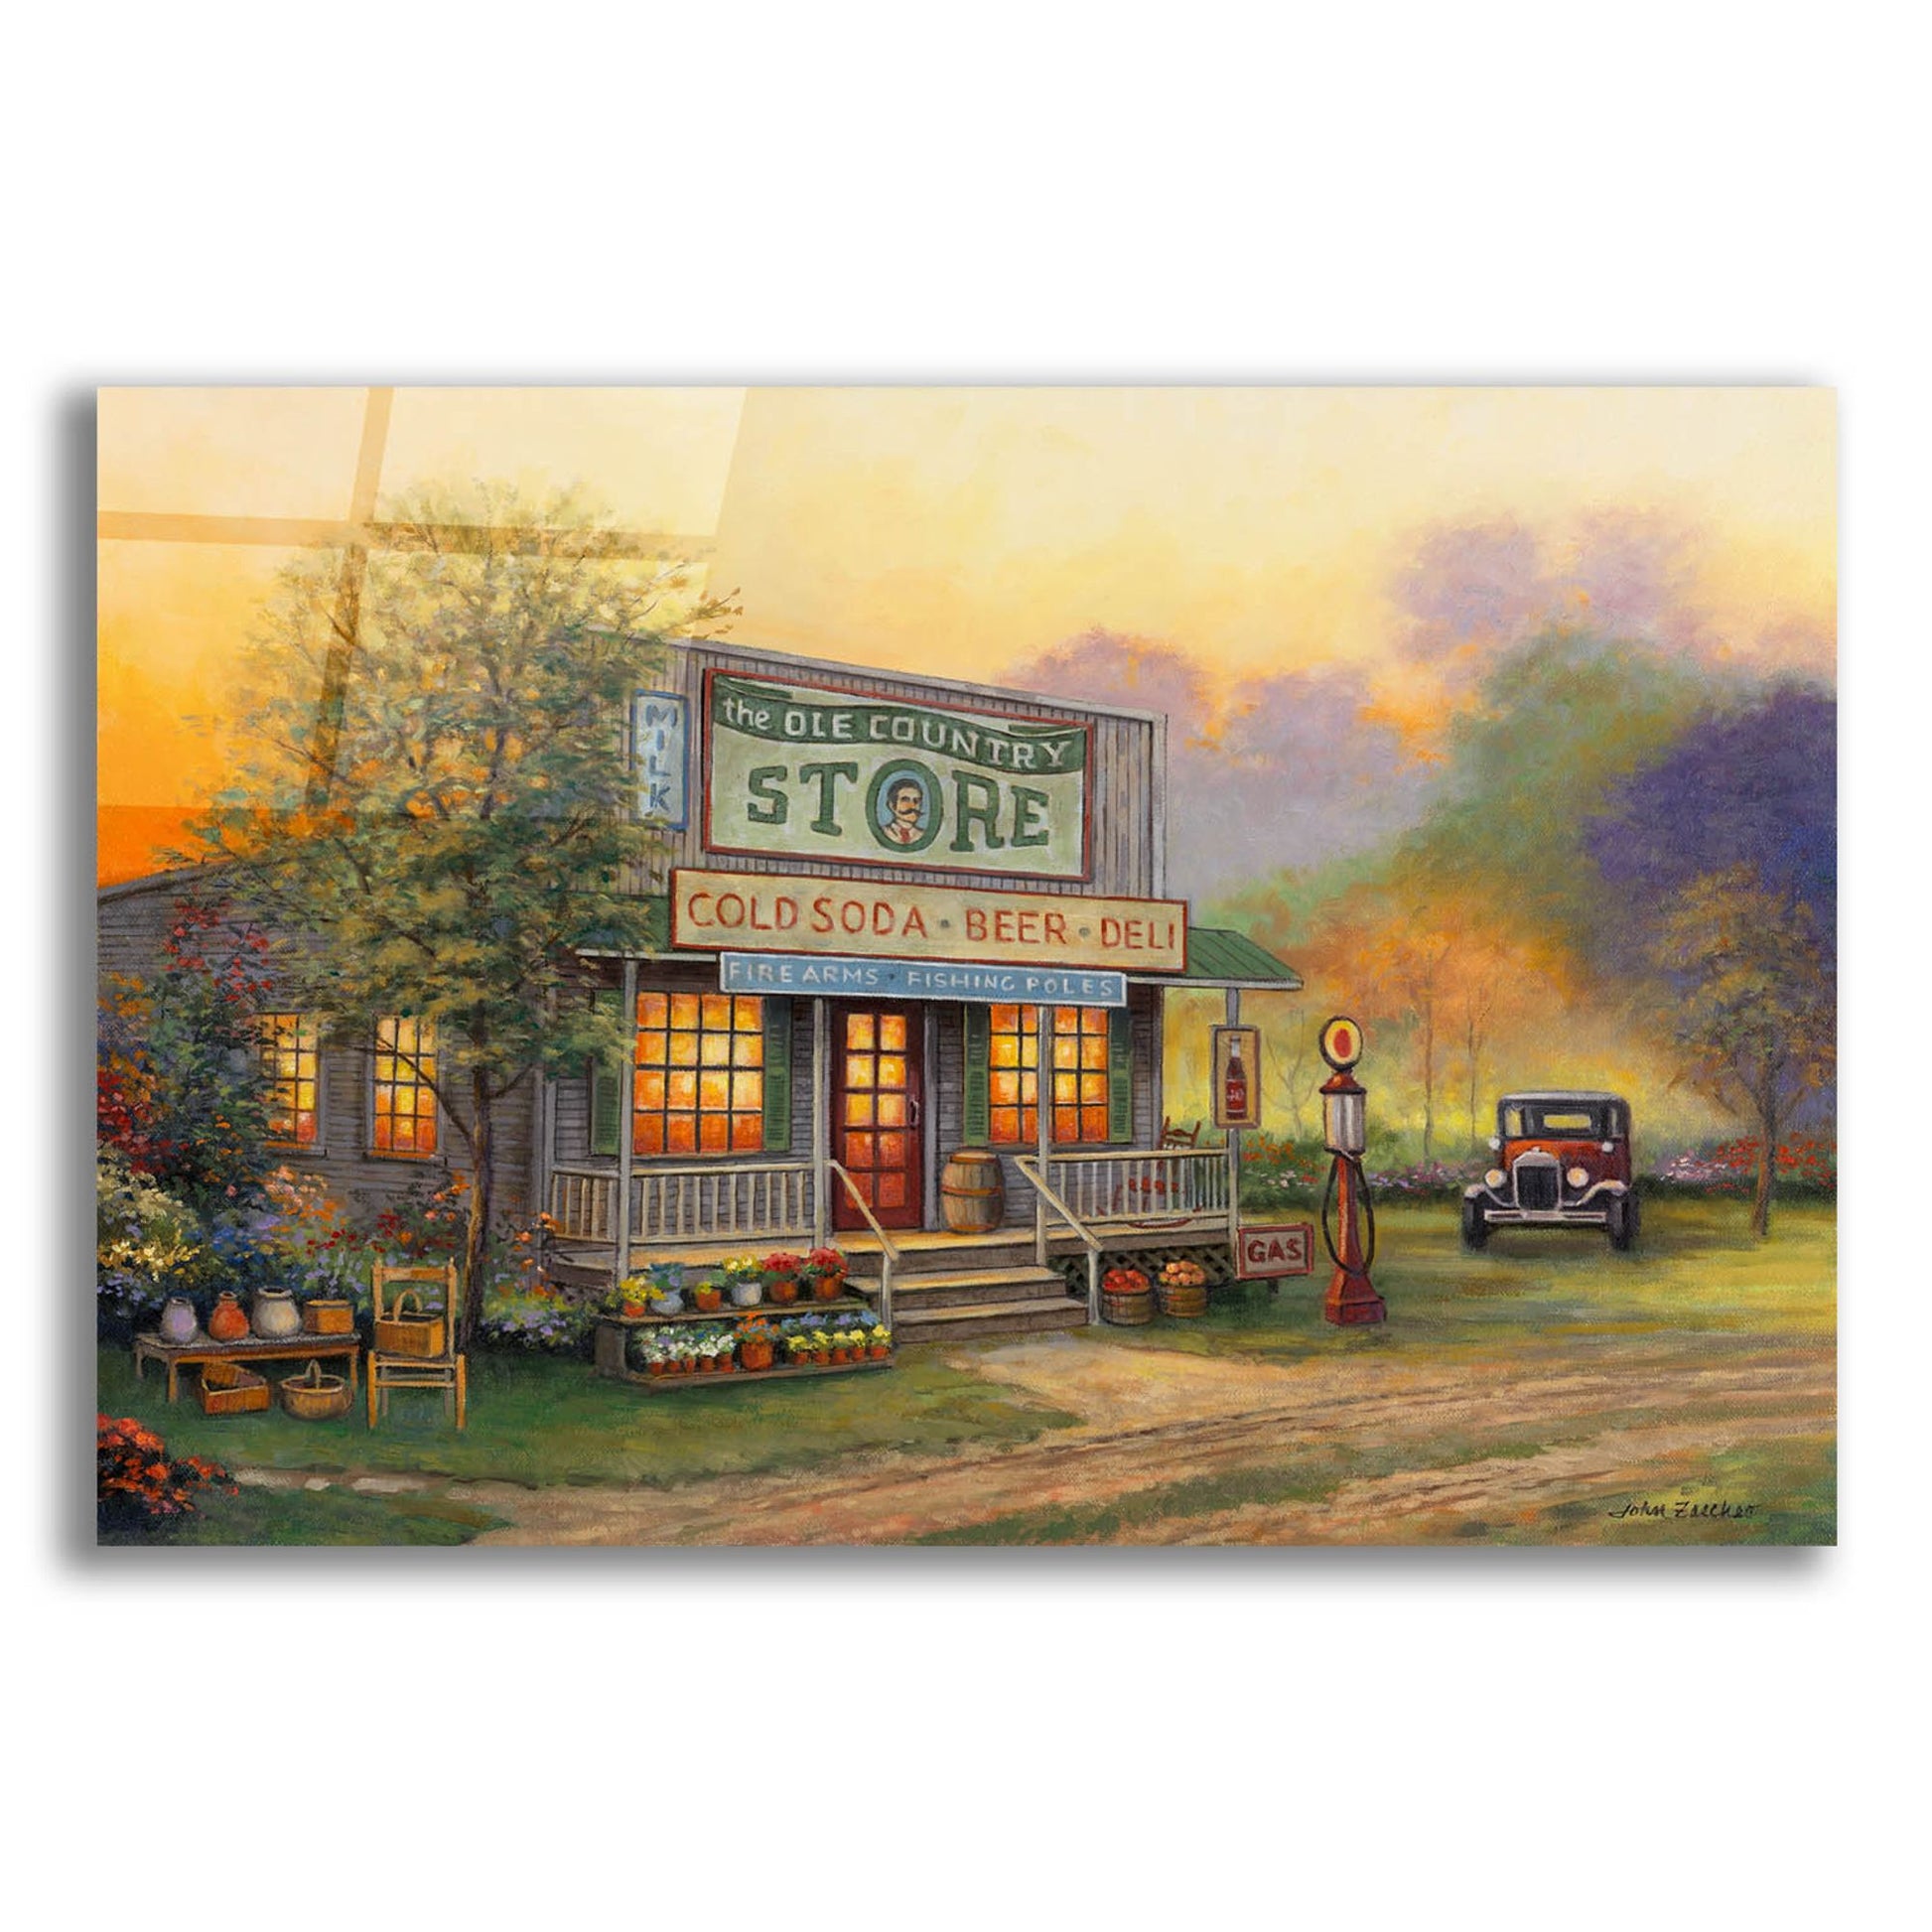 Epic Art 'Old Country Store' by John Zaccheo, Acrylic Glass Wall Art,24x16